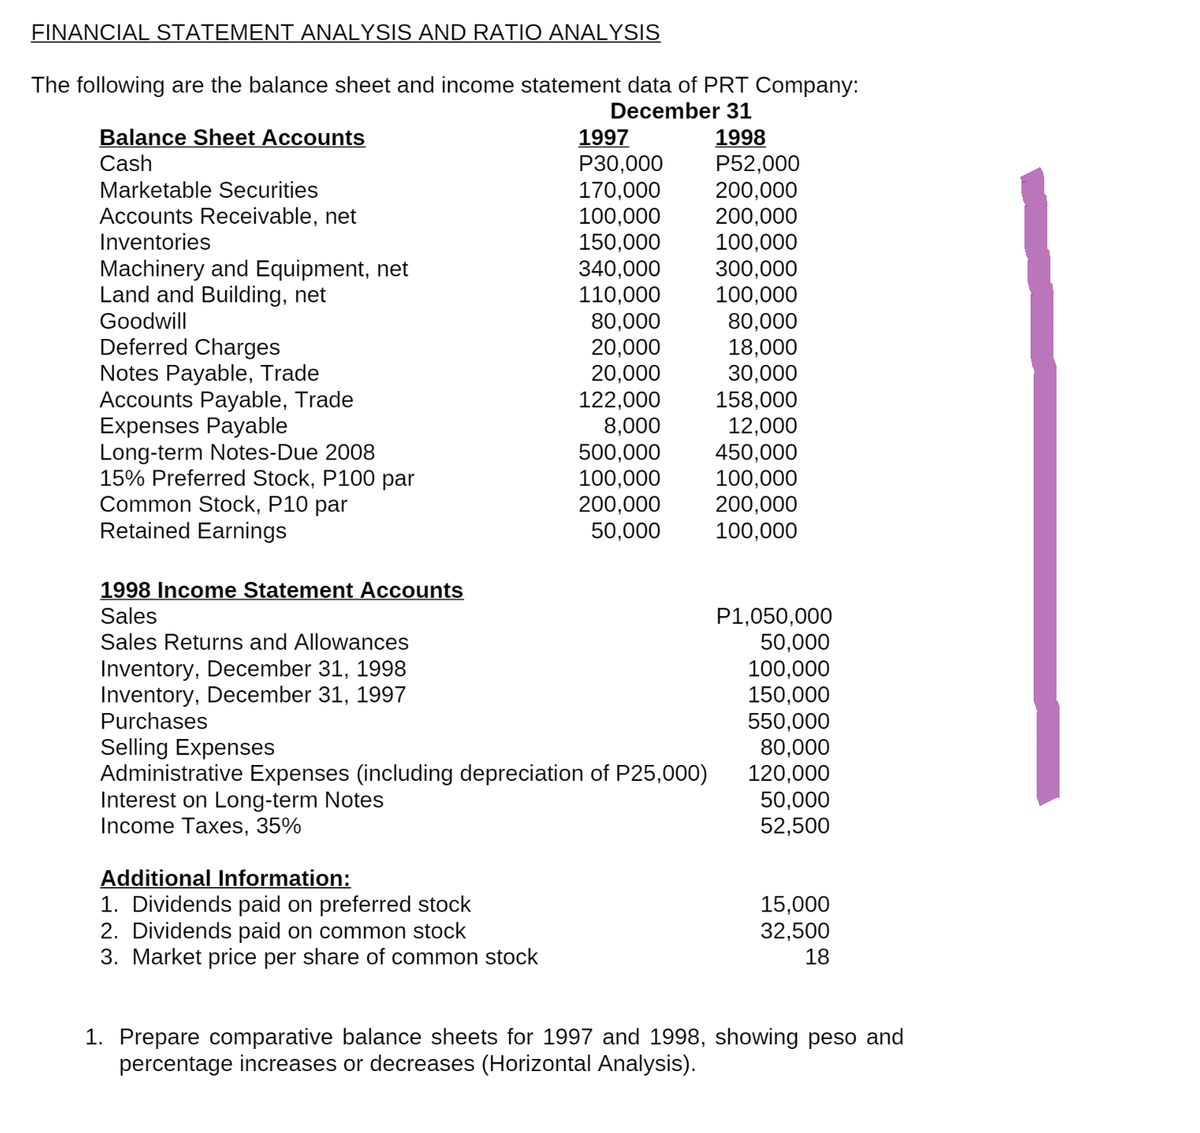 FINANCIAL STATEMENT ANALYSIS AND RATIO ANALYSIS
The following are the balance sheet and income statement data of PRT Company:
December 31
1997
1998
Balance Sheet Accounts
Cash
P30,000
P52,000
Marketable Securities
170,000
200,000
100,000
200,000
Accounts Receivable, net
Inventories
150,000
100,000
Machinery and Equipment, net
340,000
300,000
110,000
100,000
Land and Building, net
Goodwill
80,000
80,000
Deferred Charges
20,000
18,000
Notes Payable, Trade
20,000
30,000
122,000
158,000
Accounts Payable, Trade
Expenses Payable
8,000
12,000
500,000
450,000
Long-term Notes-Due 2008
15% Preferred Stock, P100 par
100,000
100,000
Common Stock, P10 par
200,000
200,000
Retained Earnings
50,000
100,000
1998 Income Statement Accounts
Sales
P1,050,000
50,000
Sales Returns and Allowances
100,000
Inventory, December 31, 1998
Inventory, December 31, 1997
Purchases
150,000
550,000
Selling Expenses
80,000
Administrative Expenses (including depreciation of P25,000)
120,000
Interest on Long-term Notes
50,000
Income Taxes, 35%
52,500
Additional Information:
1. Dividends paid on preferred stock
15,000
2. Dividends paid on common stock
32,500
18
3. Market price per share of common stock
1. Prepare comparative balance sheets for 1997 and 1998, showing peso and
percentage increases or decreases (Horizontal Analysis).